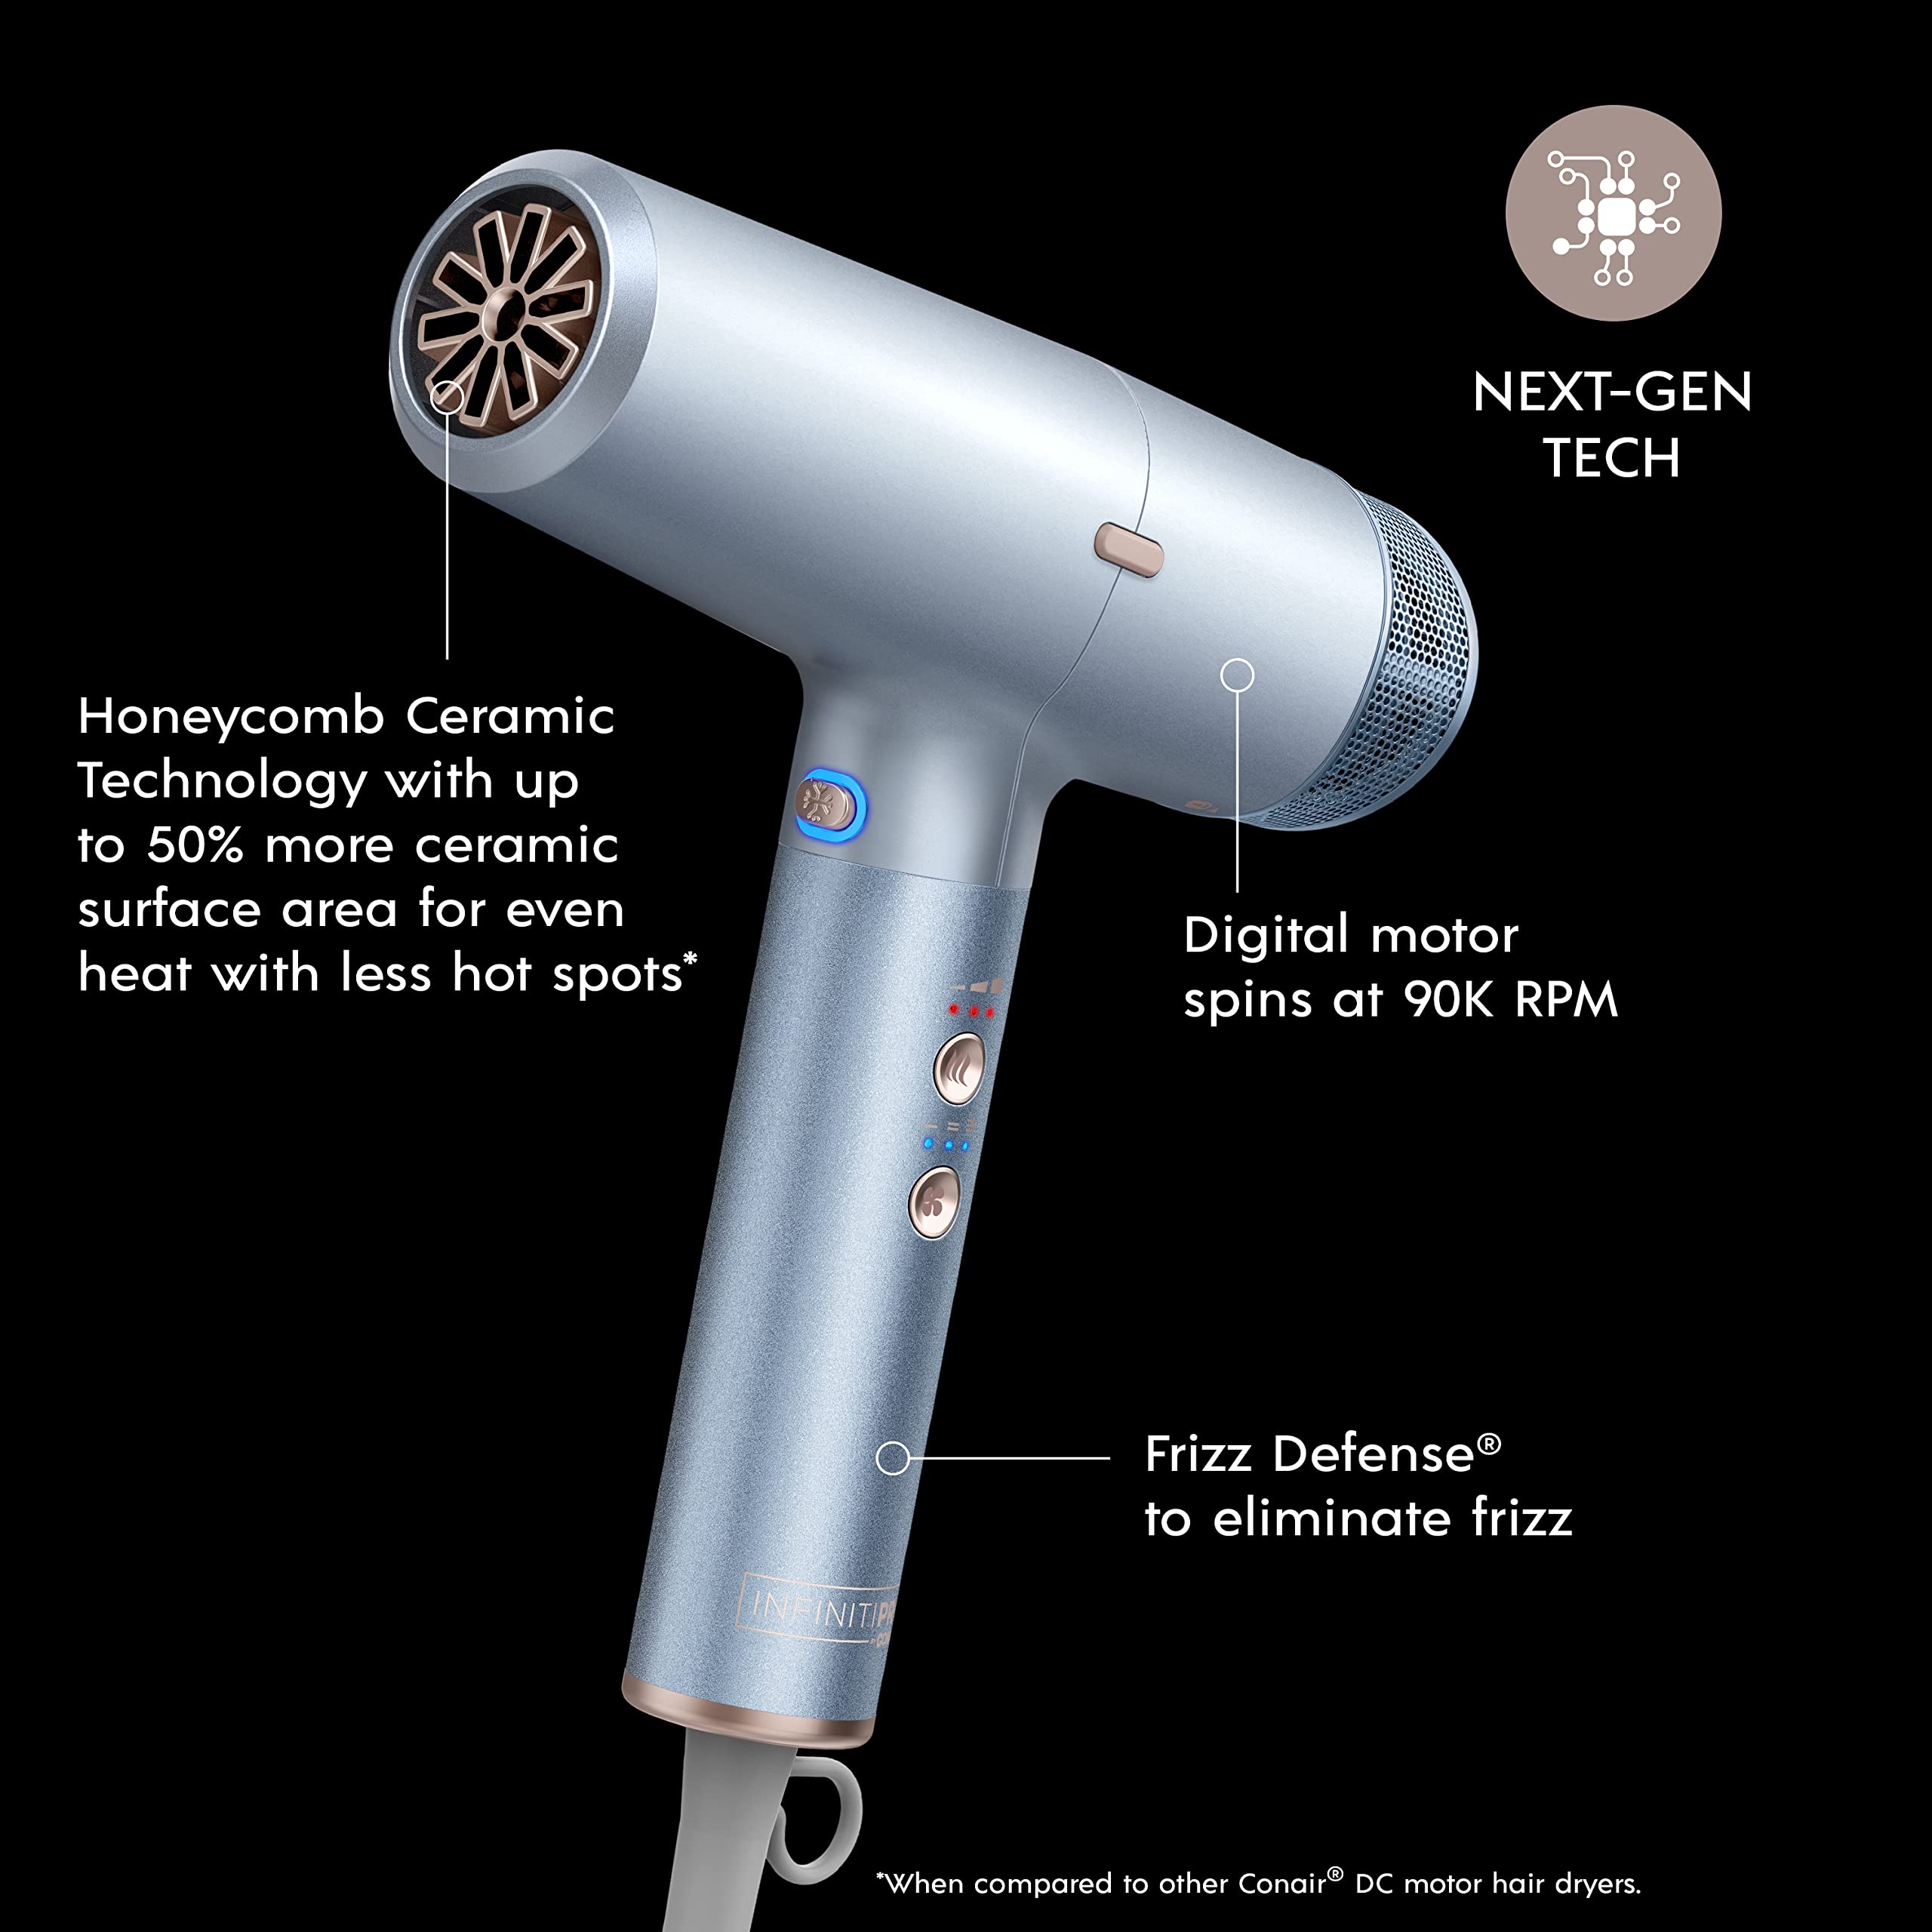 INFINITIPRO by CONAIR DigitalAIRE Hair Dryer, 1875W Hair Dryer with Diffuser, Digital Motor Spins up to 90,000 RPMs for up to 5X More Speed Plus Honeycomb Ceramic Technology Helps Prevent hotspots